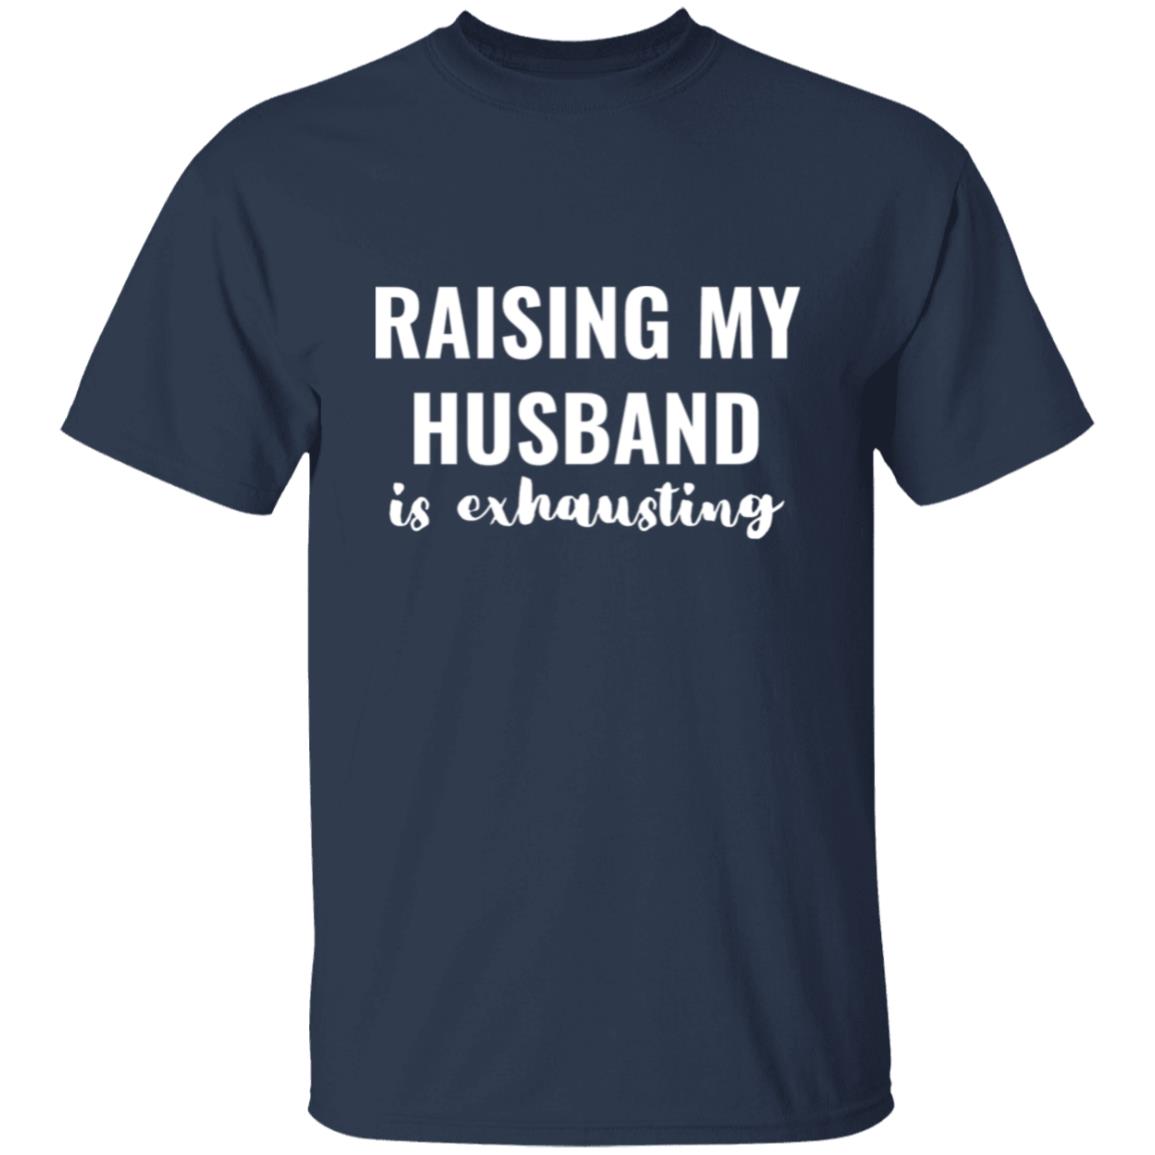 Get trendy with Raising my husband is exhausting Raising My Husband is Exhausting  T-Shirt - T-Shirts available at Good Gift Company. Grab yours for $17.95 today!